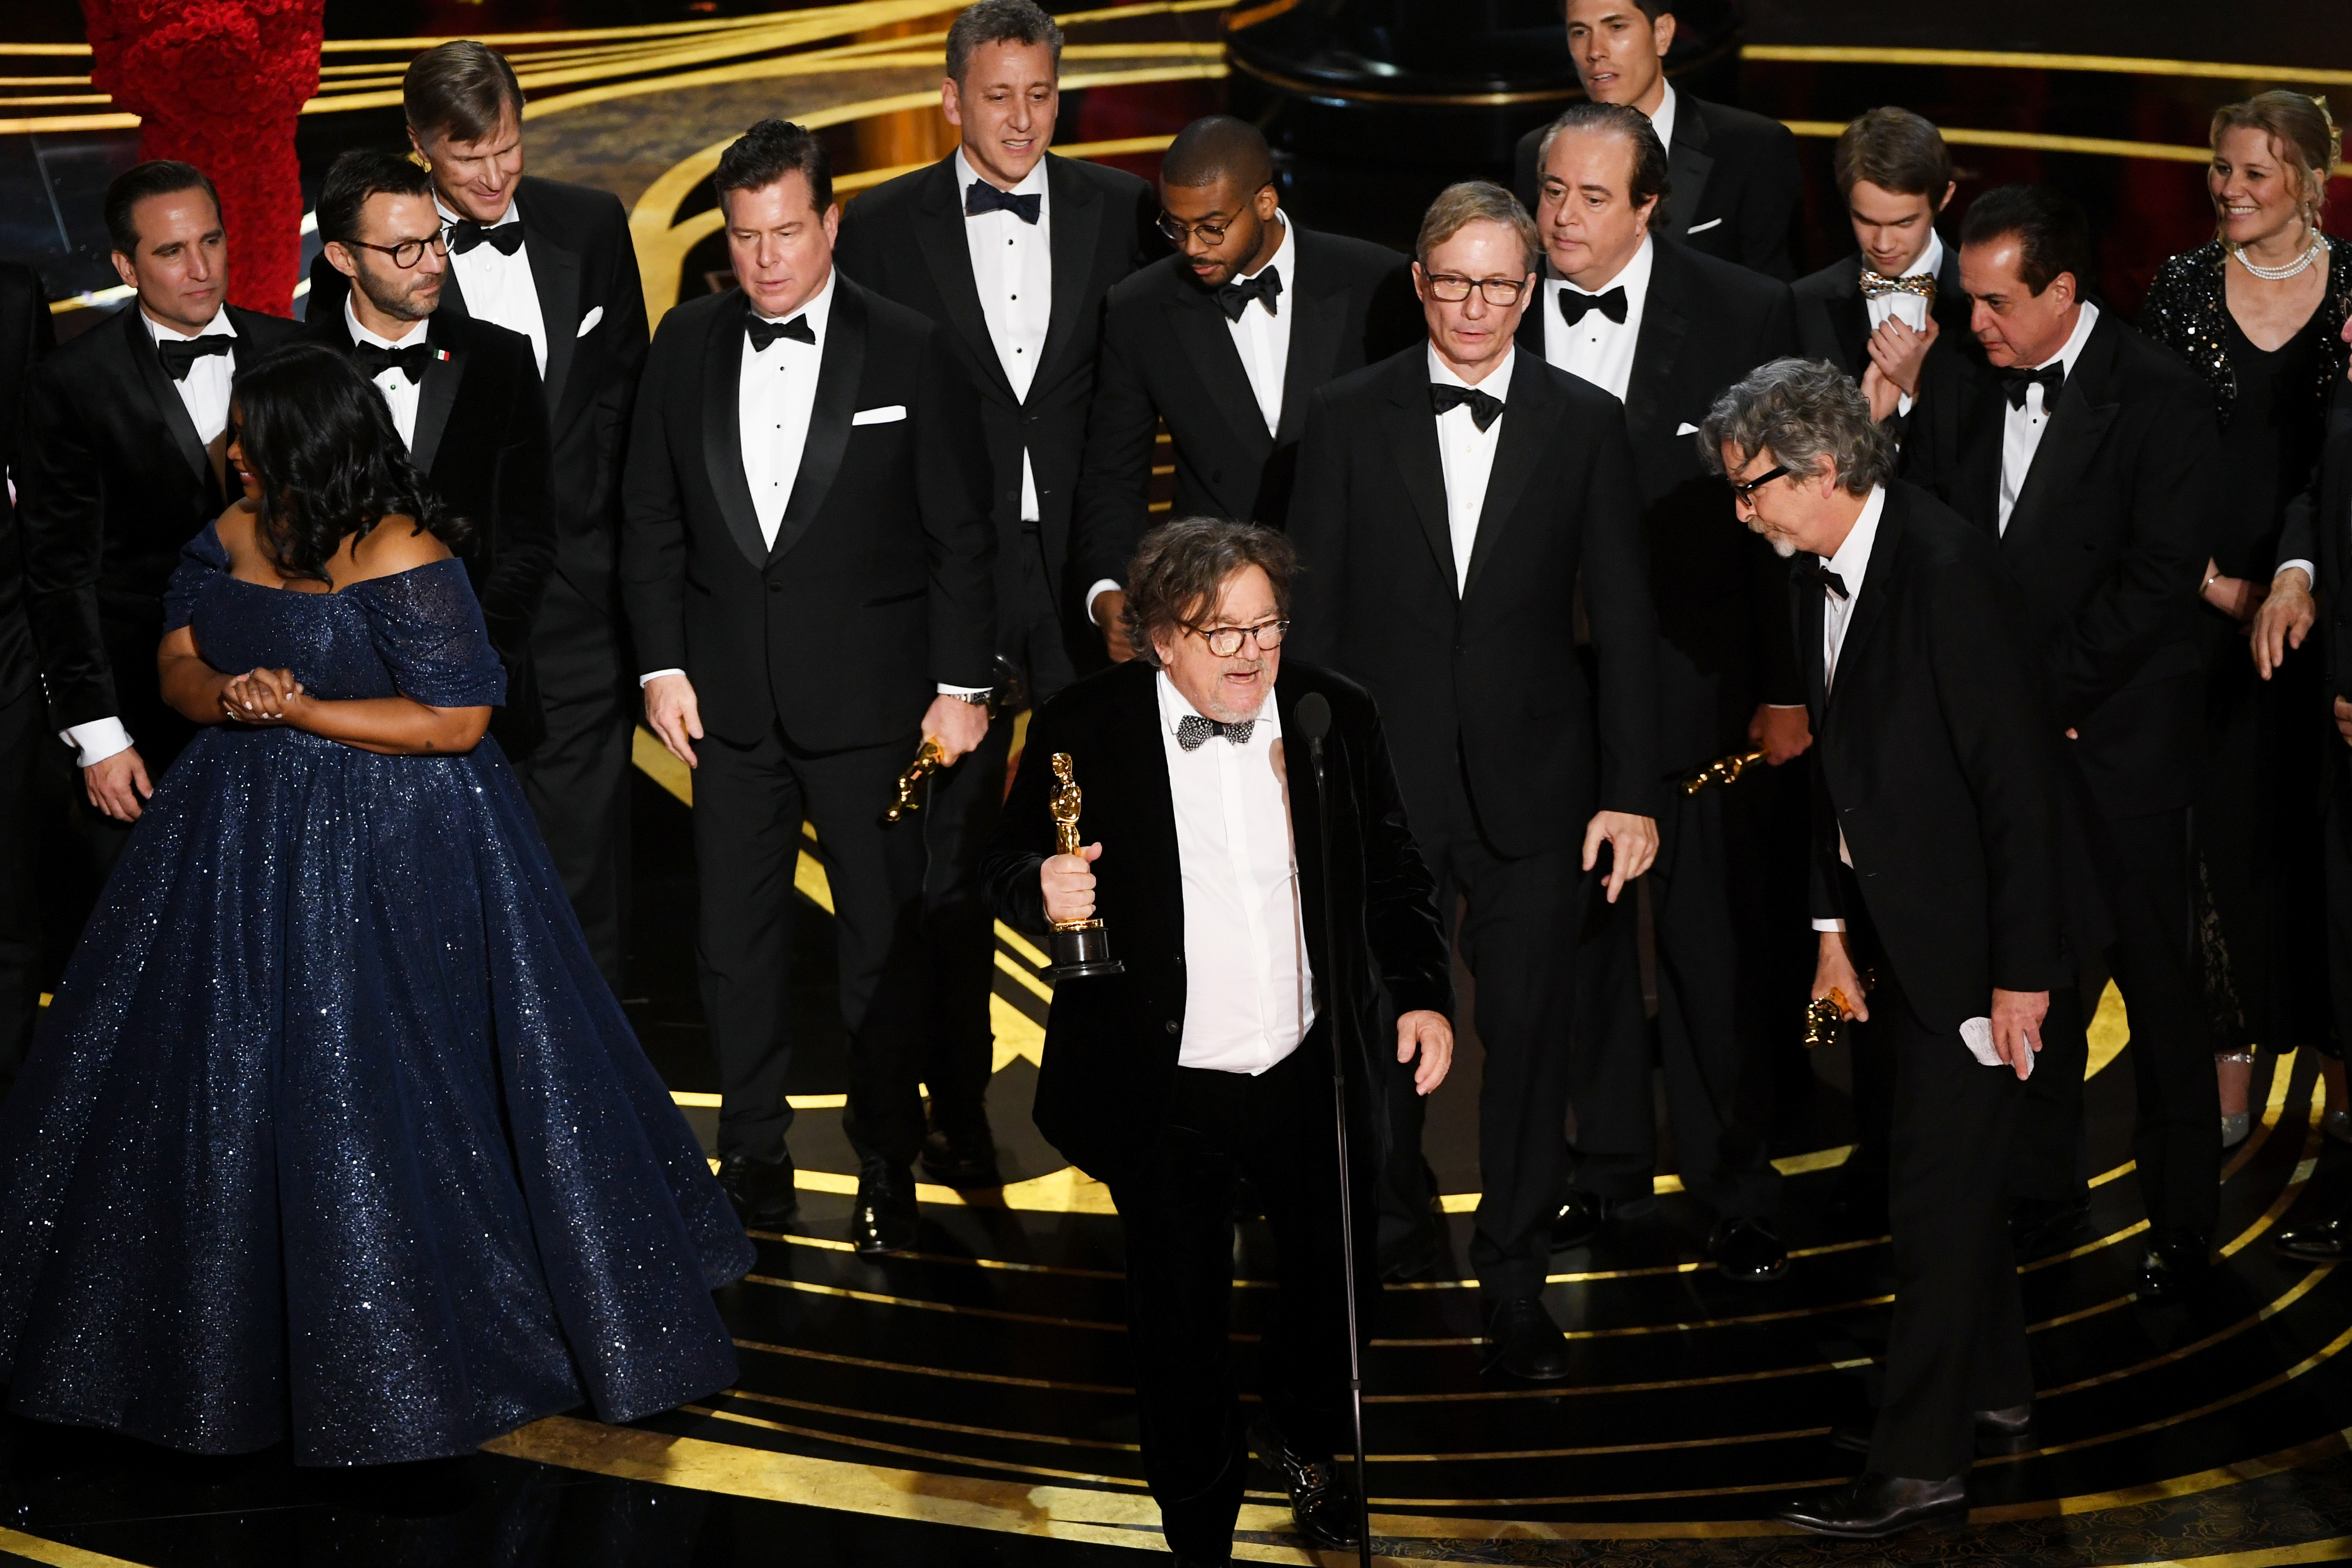 HOLLYWOOD, CALIFORNIA - FEBRUARY 24: Charles B. Wessler (C) and cast and crew of 'Green Book' accept the Best Picture award onstage during the 91st Annual Academy Awards at Dolby Theatre on February 24, 2019 in Hollywood, California. (Photo by Kevin Winter/Getty Images)